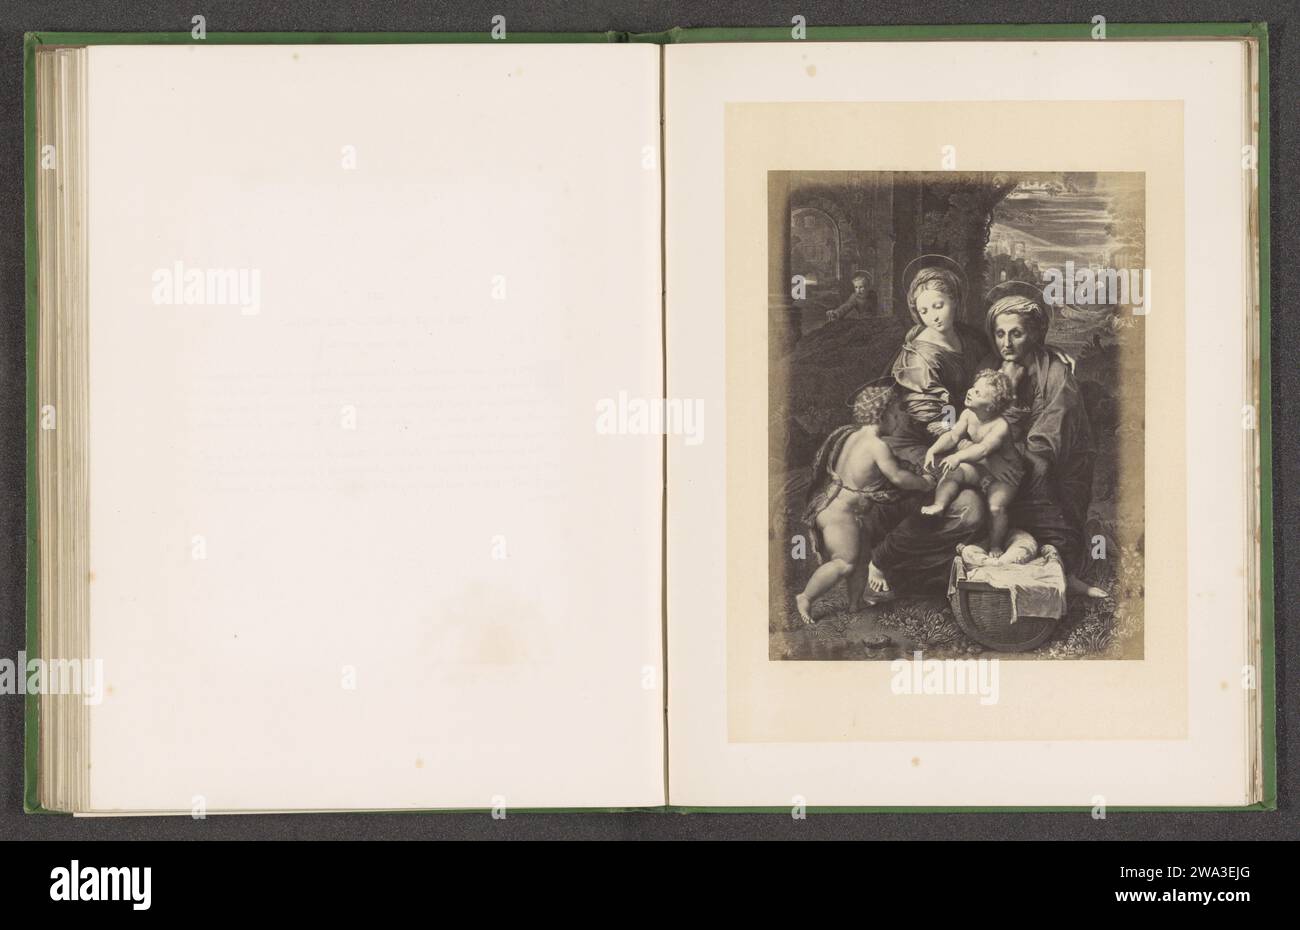 Photo production of a print by Narcisse Lecomte by La Perla by Rafaël, Joseph Cundall (Possible), After Narcisse Lecomte, c. 1859 - in or before 1869 photograph   photographic support albumen print Holy Family, and derived representations Stock Photo